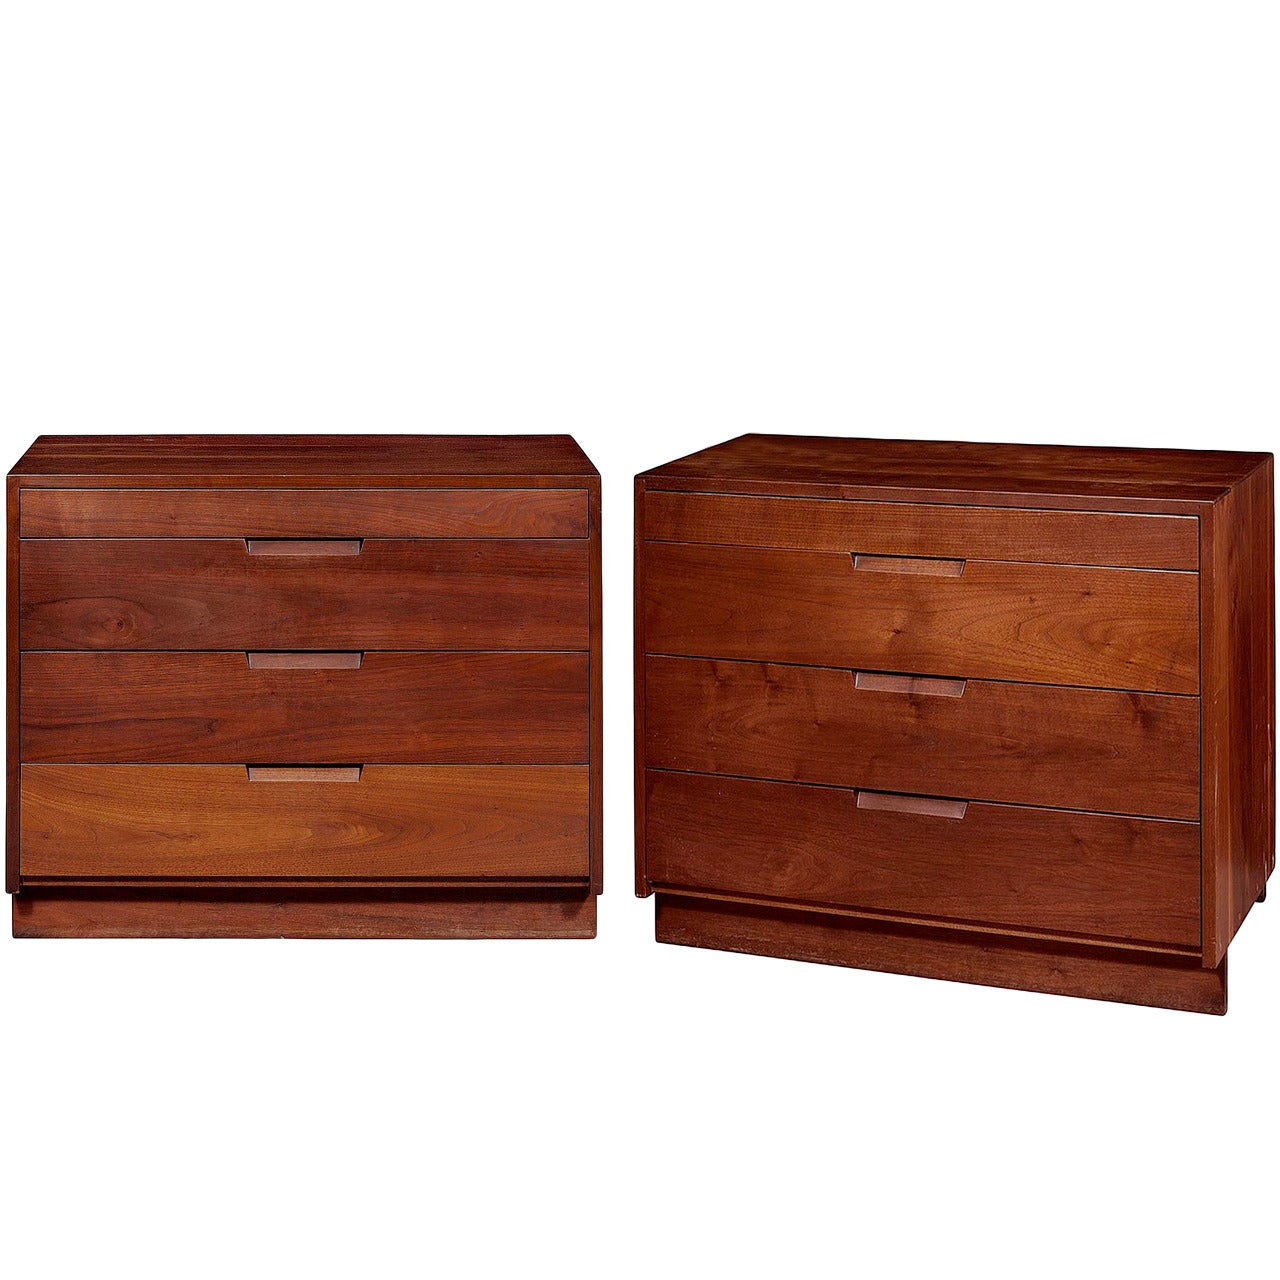 Pair of American Black Walnut Chests by George Nakashima